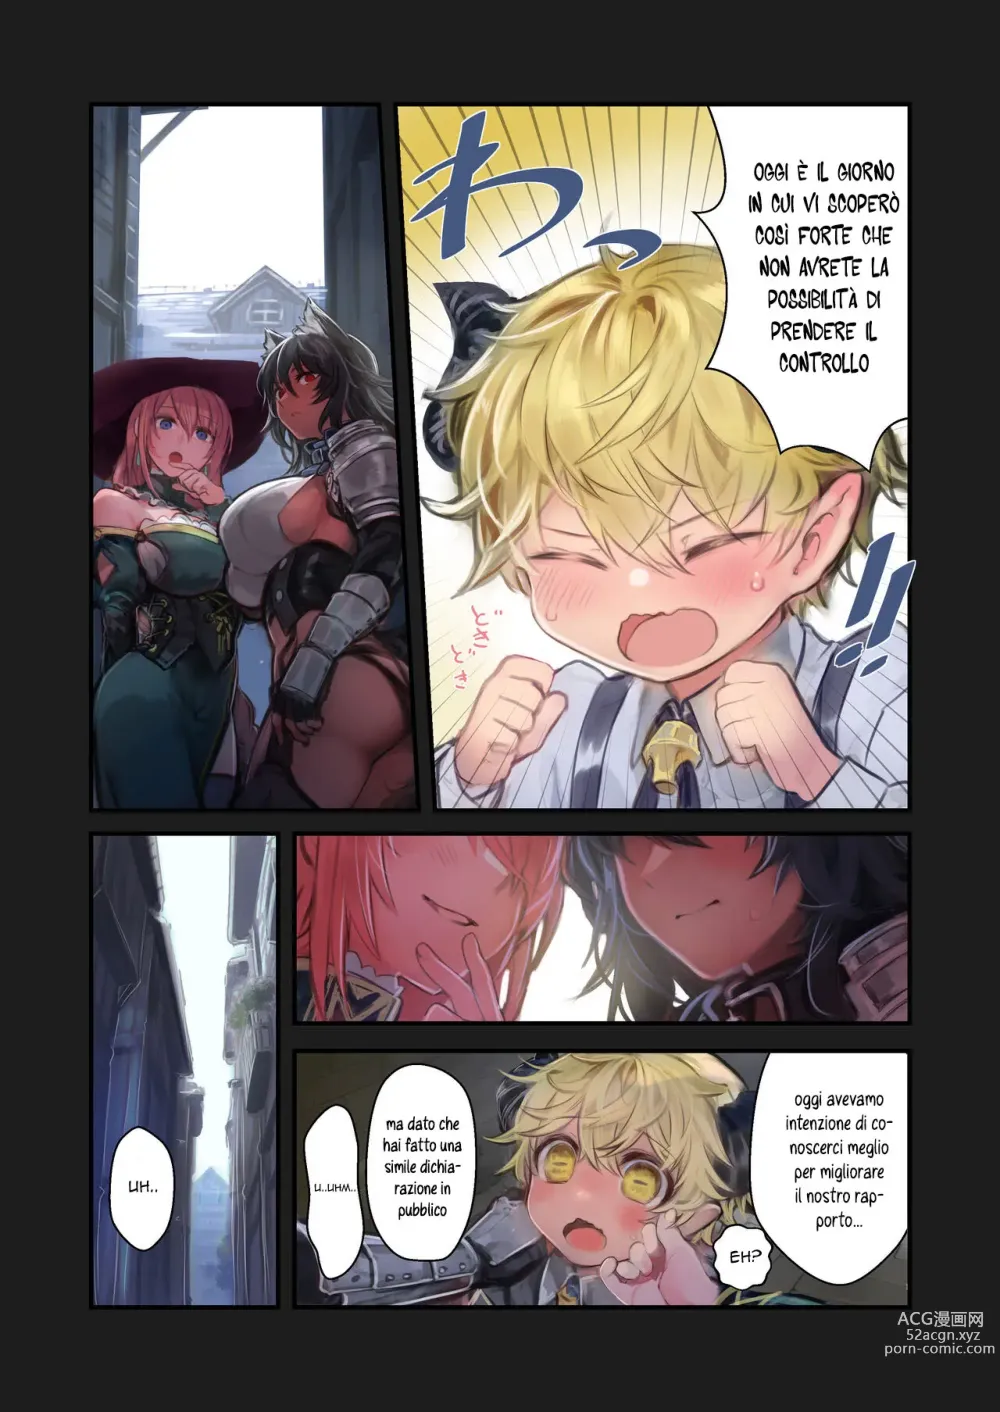 Page 50 of doujinshi MILK -A story About An Incubus Being Fondled By Two Onee-sans- (decensored)